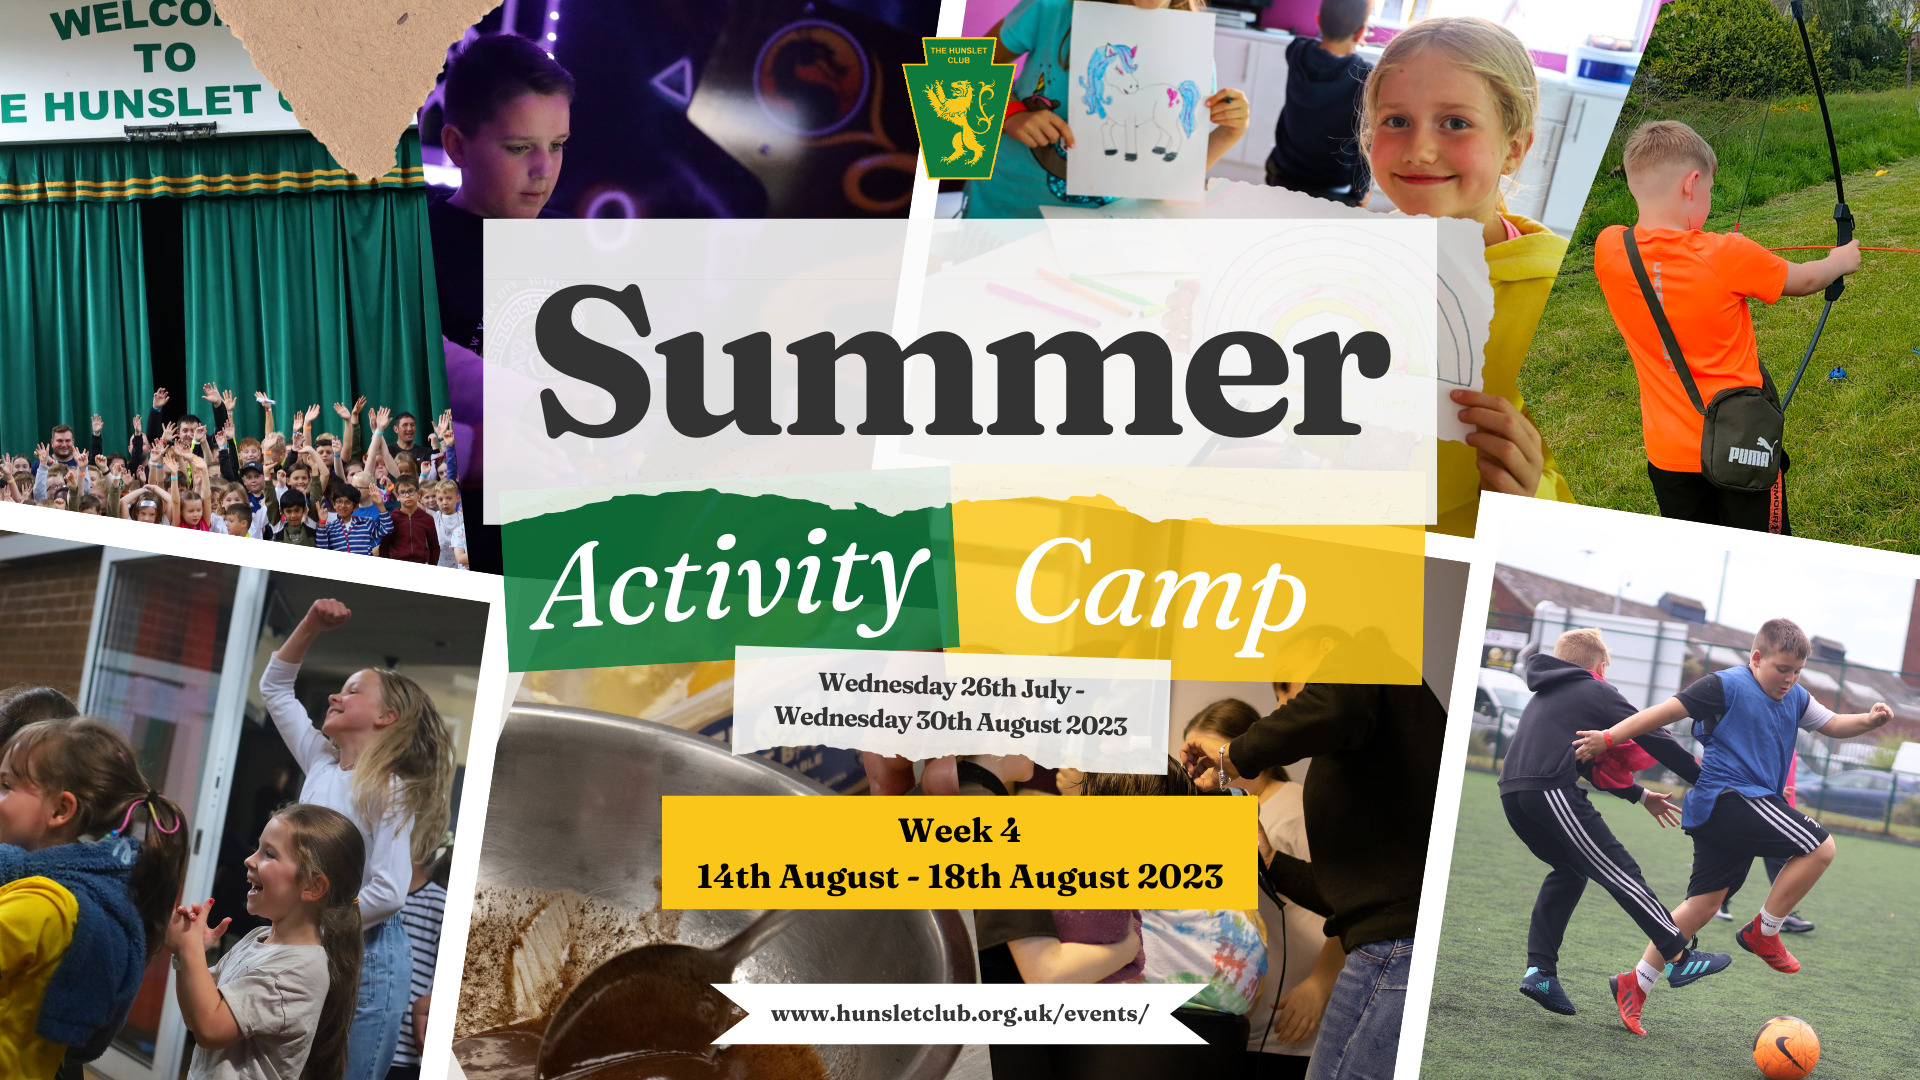 Summer Activity Camp - Week 4 14th August - 18th August 2023